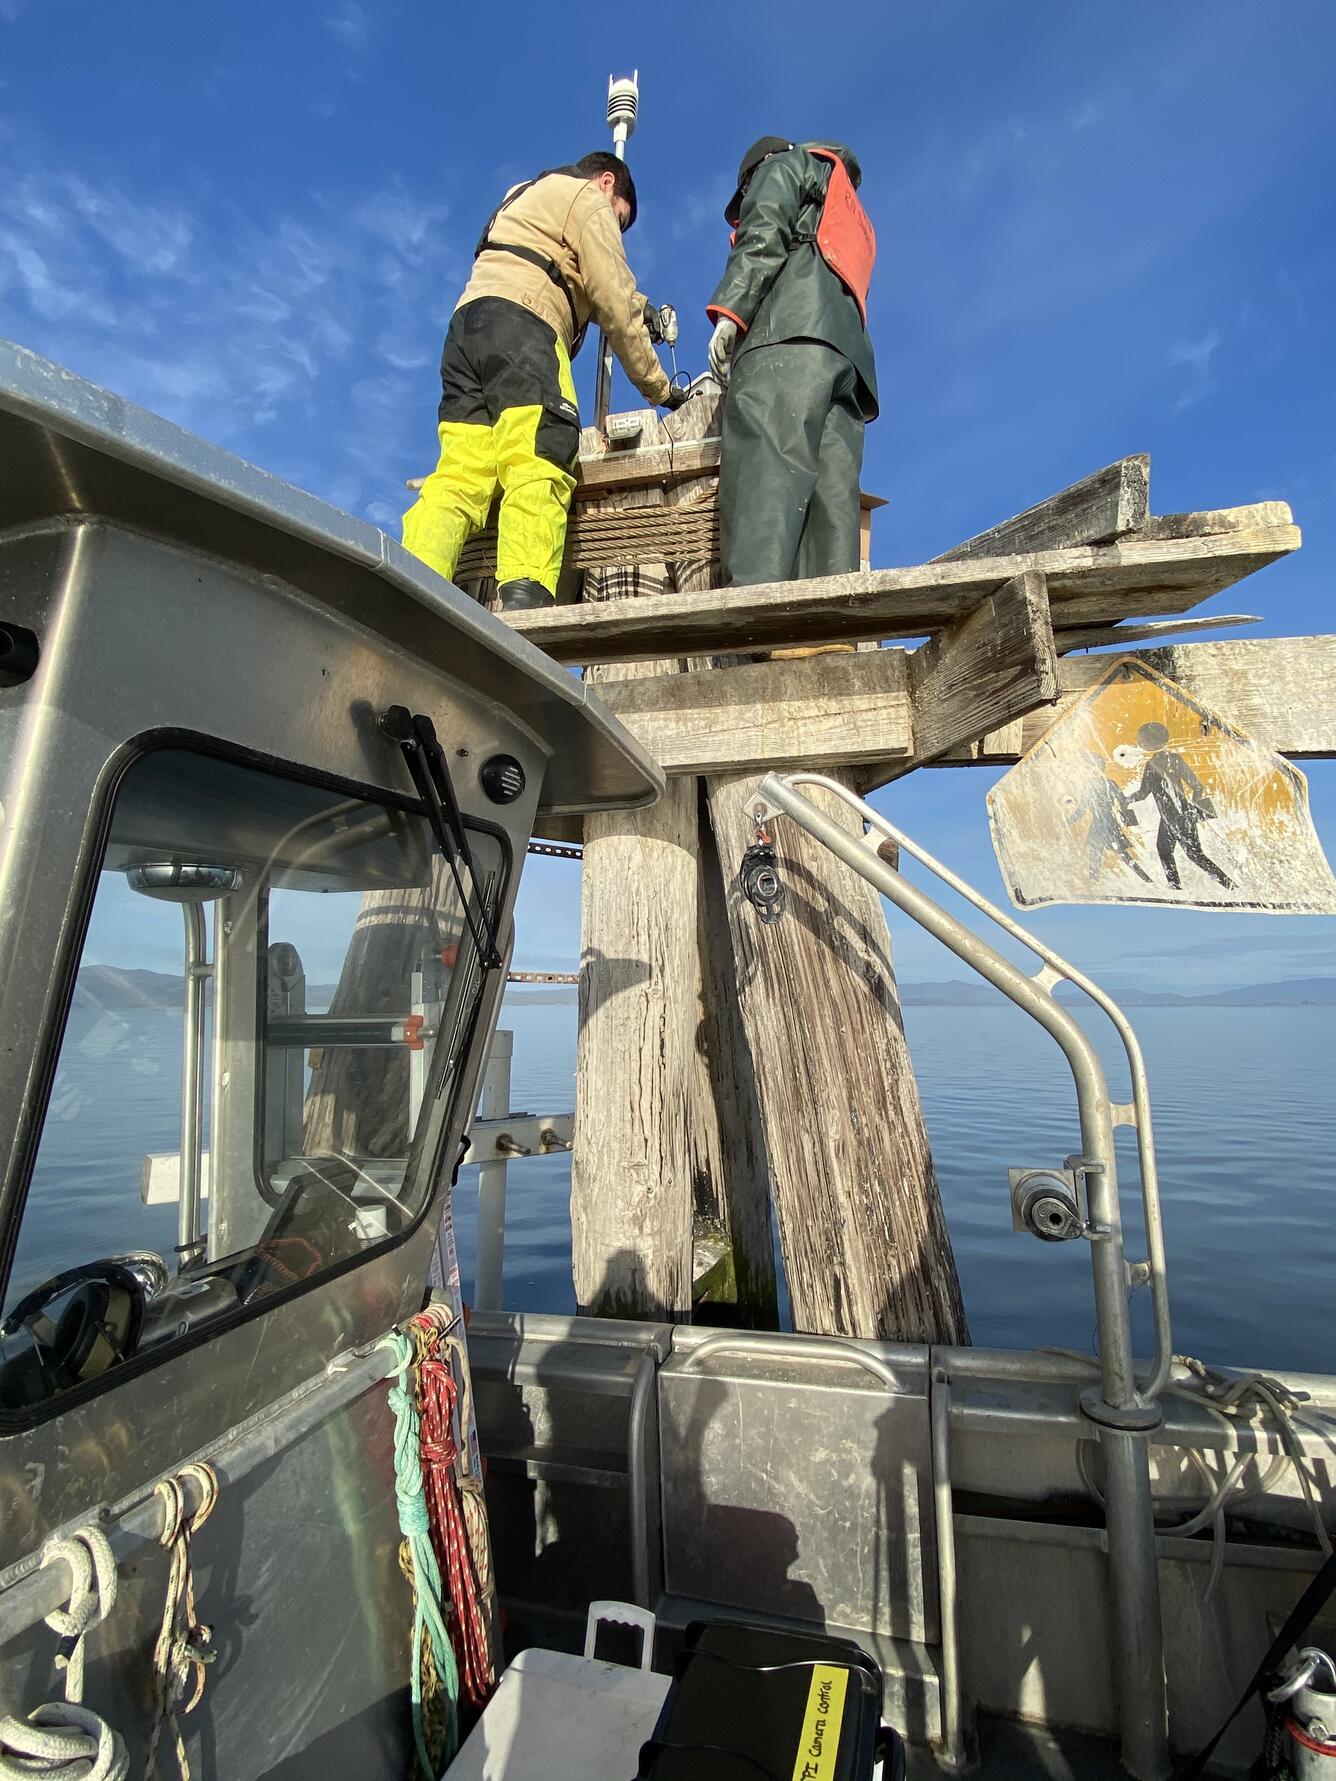 Two people install instruments atop a permanent mooring called a dolphin, large wooden pilings affixed in shallow water.